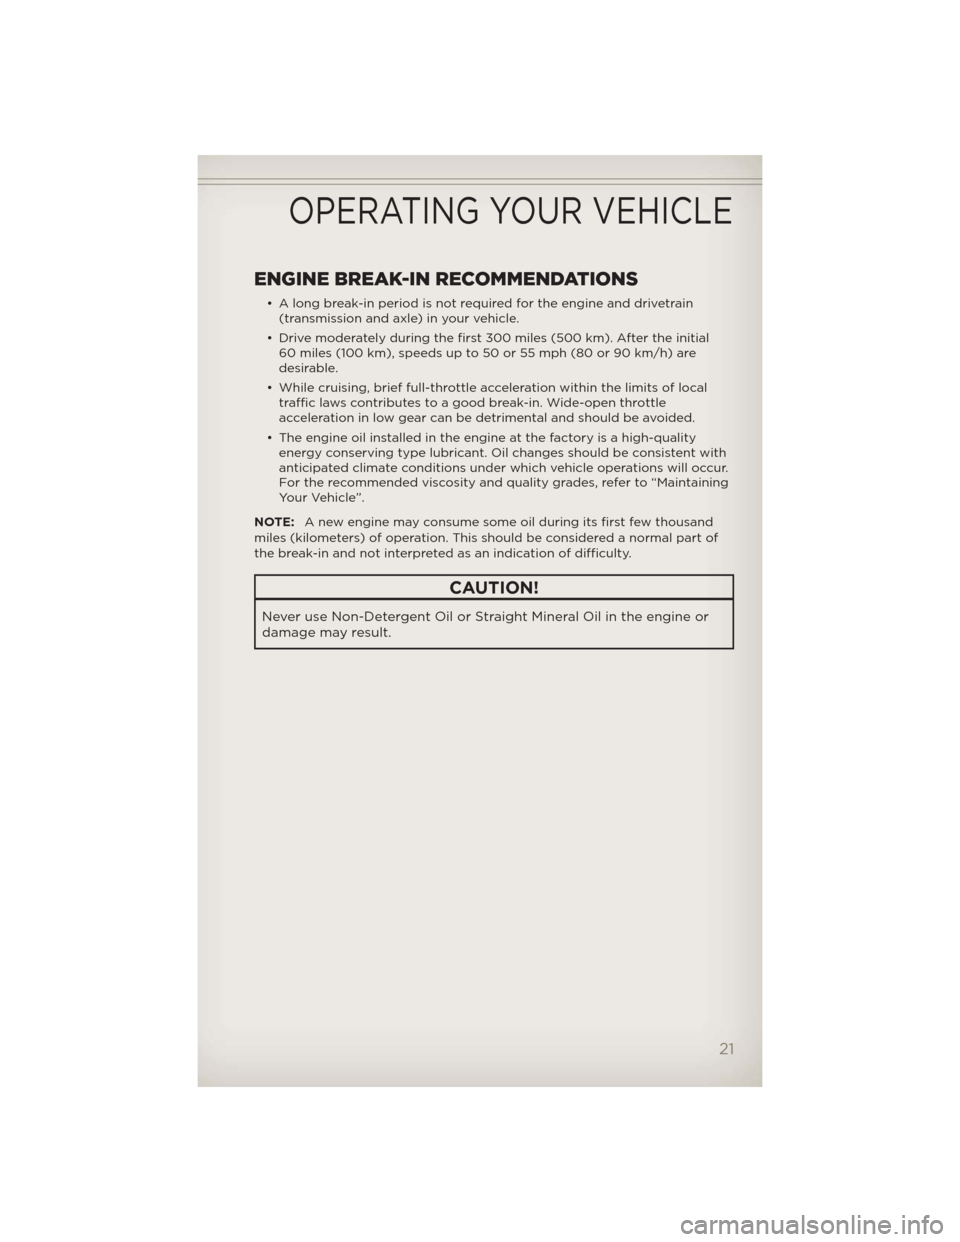 JEEP WRANGLER 2012 JK / 3.G Owners Manual ENGINE BREAK-IN RECOMMENDATIONS
• A long break-in period is not required for the engine and drivetrain
(transmission and axle) in your vehicle.
• Drive moderately during the first 300 miles (500 k